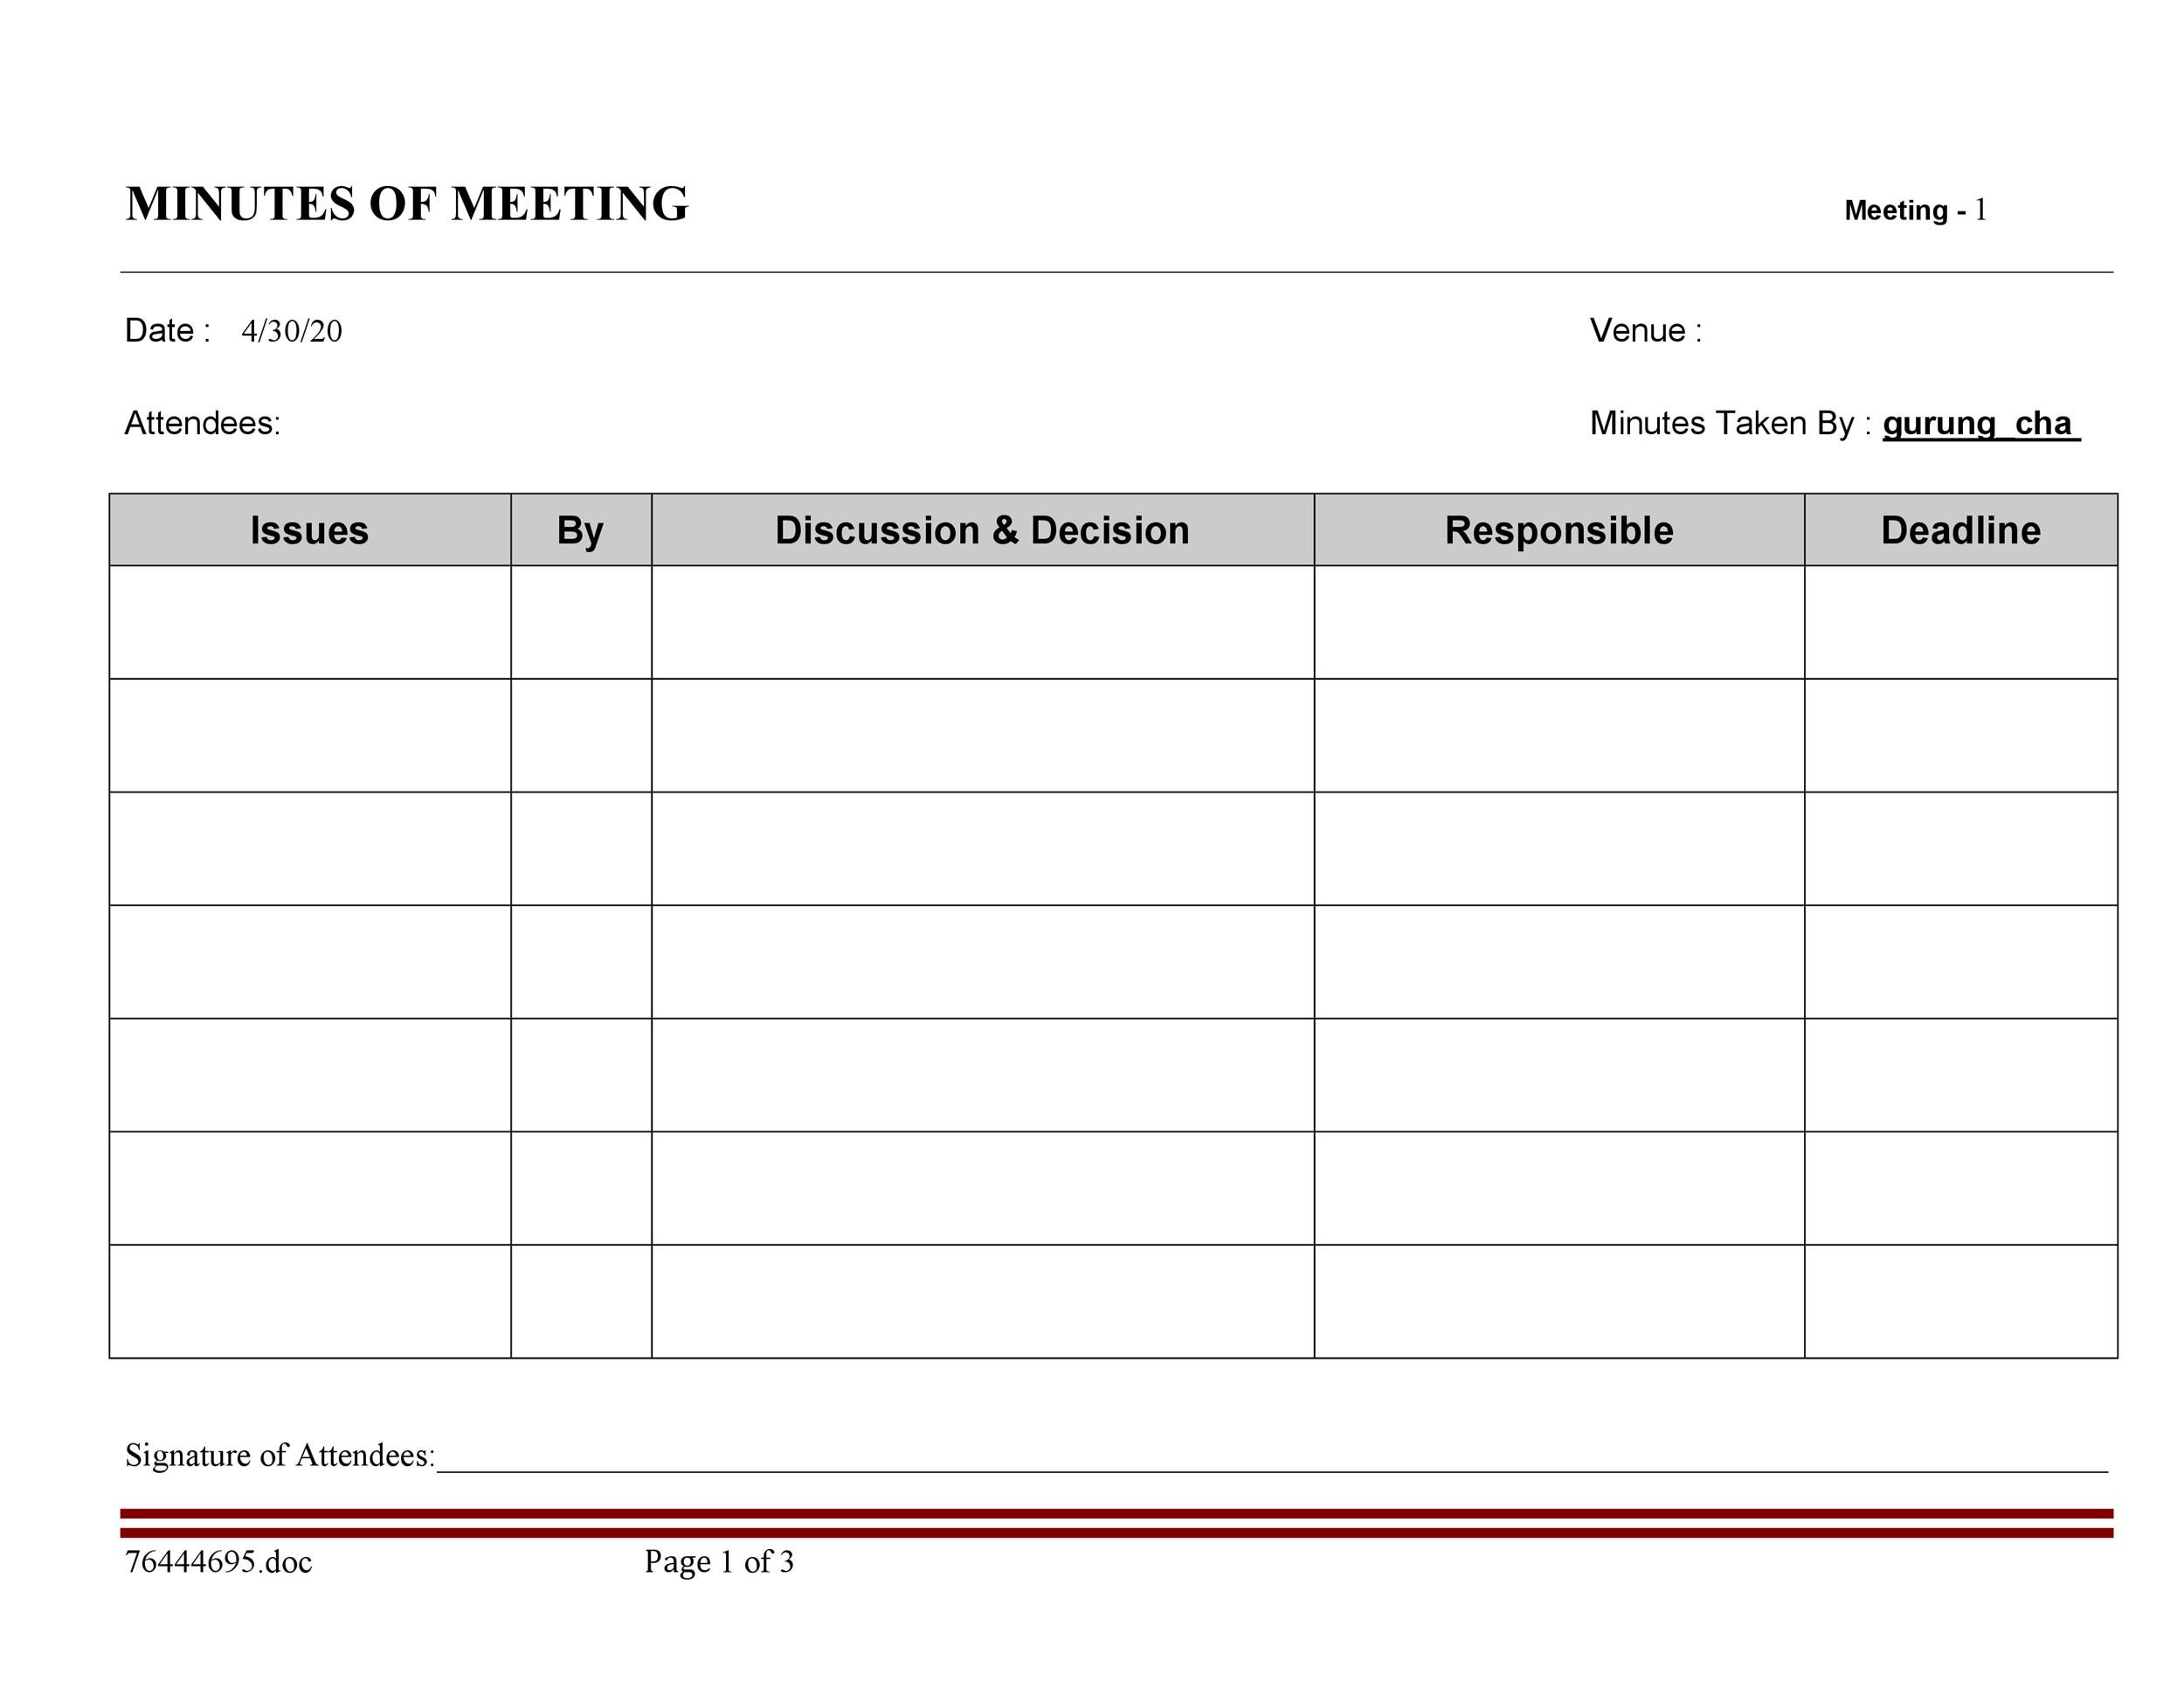 20-handy-meeting-minutes-meeting-notes-templates